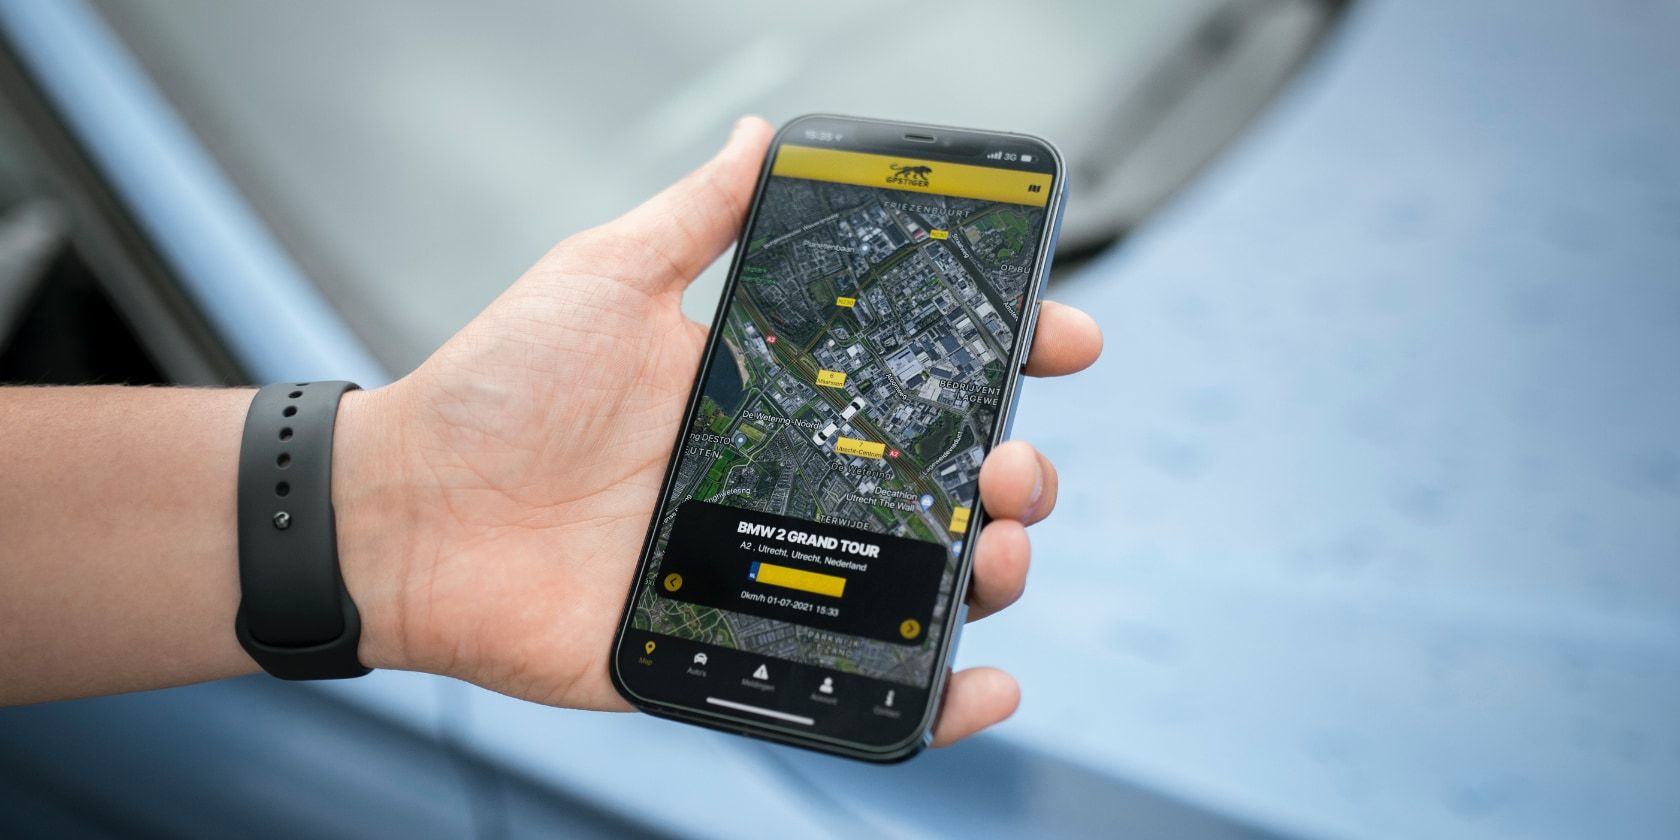 gps tracking on android phone